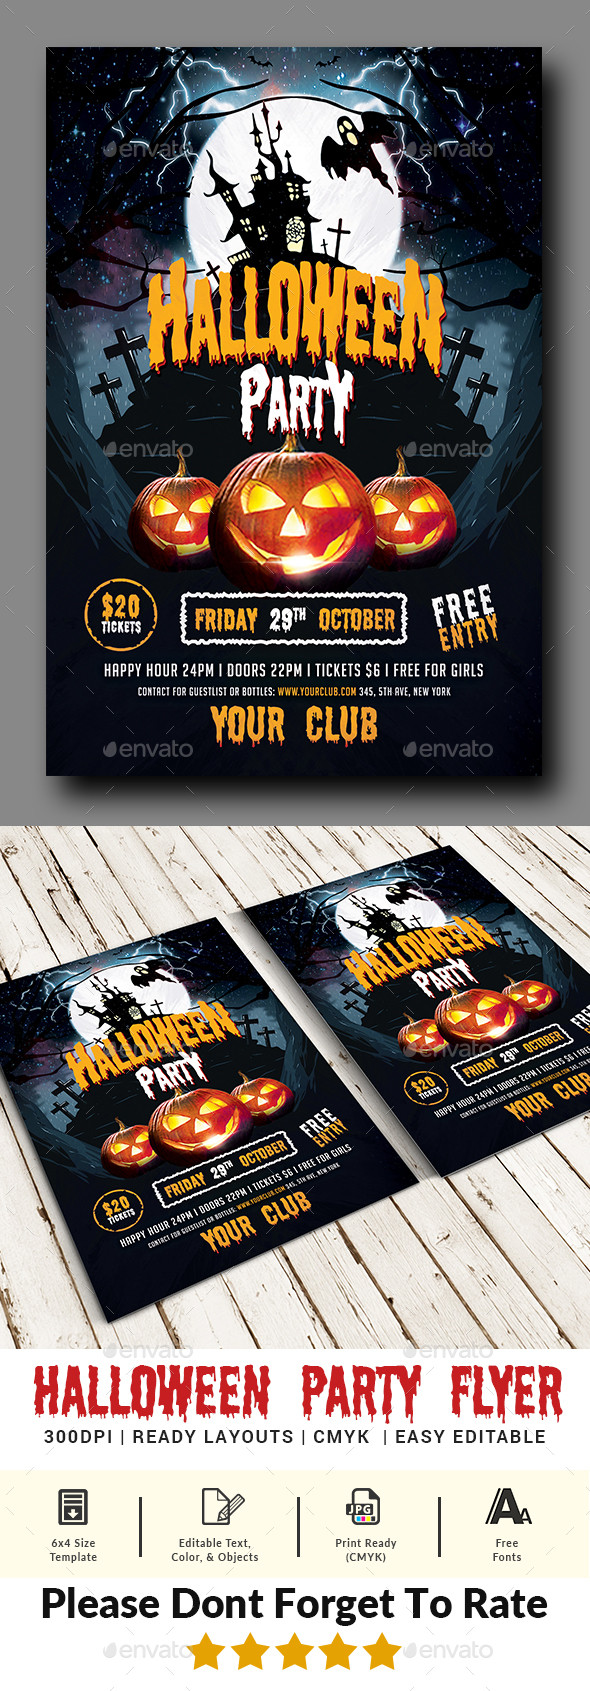 Halloween Party Flyer Ideas
 Halloween Party Flyer Templates by afjamaal